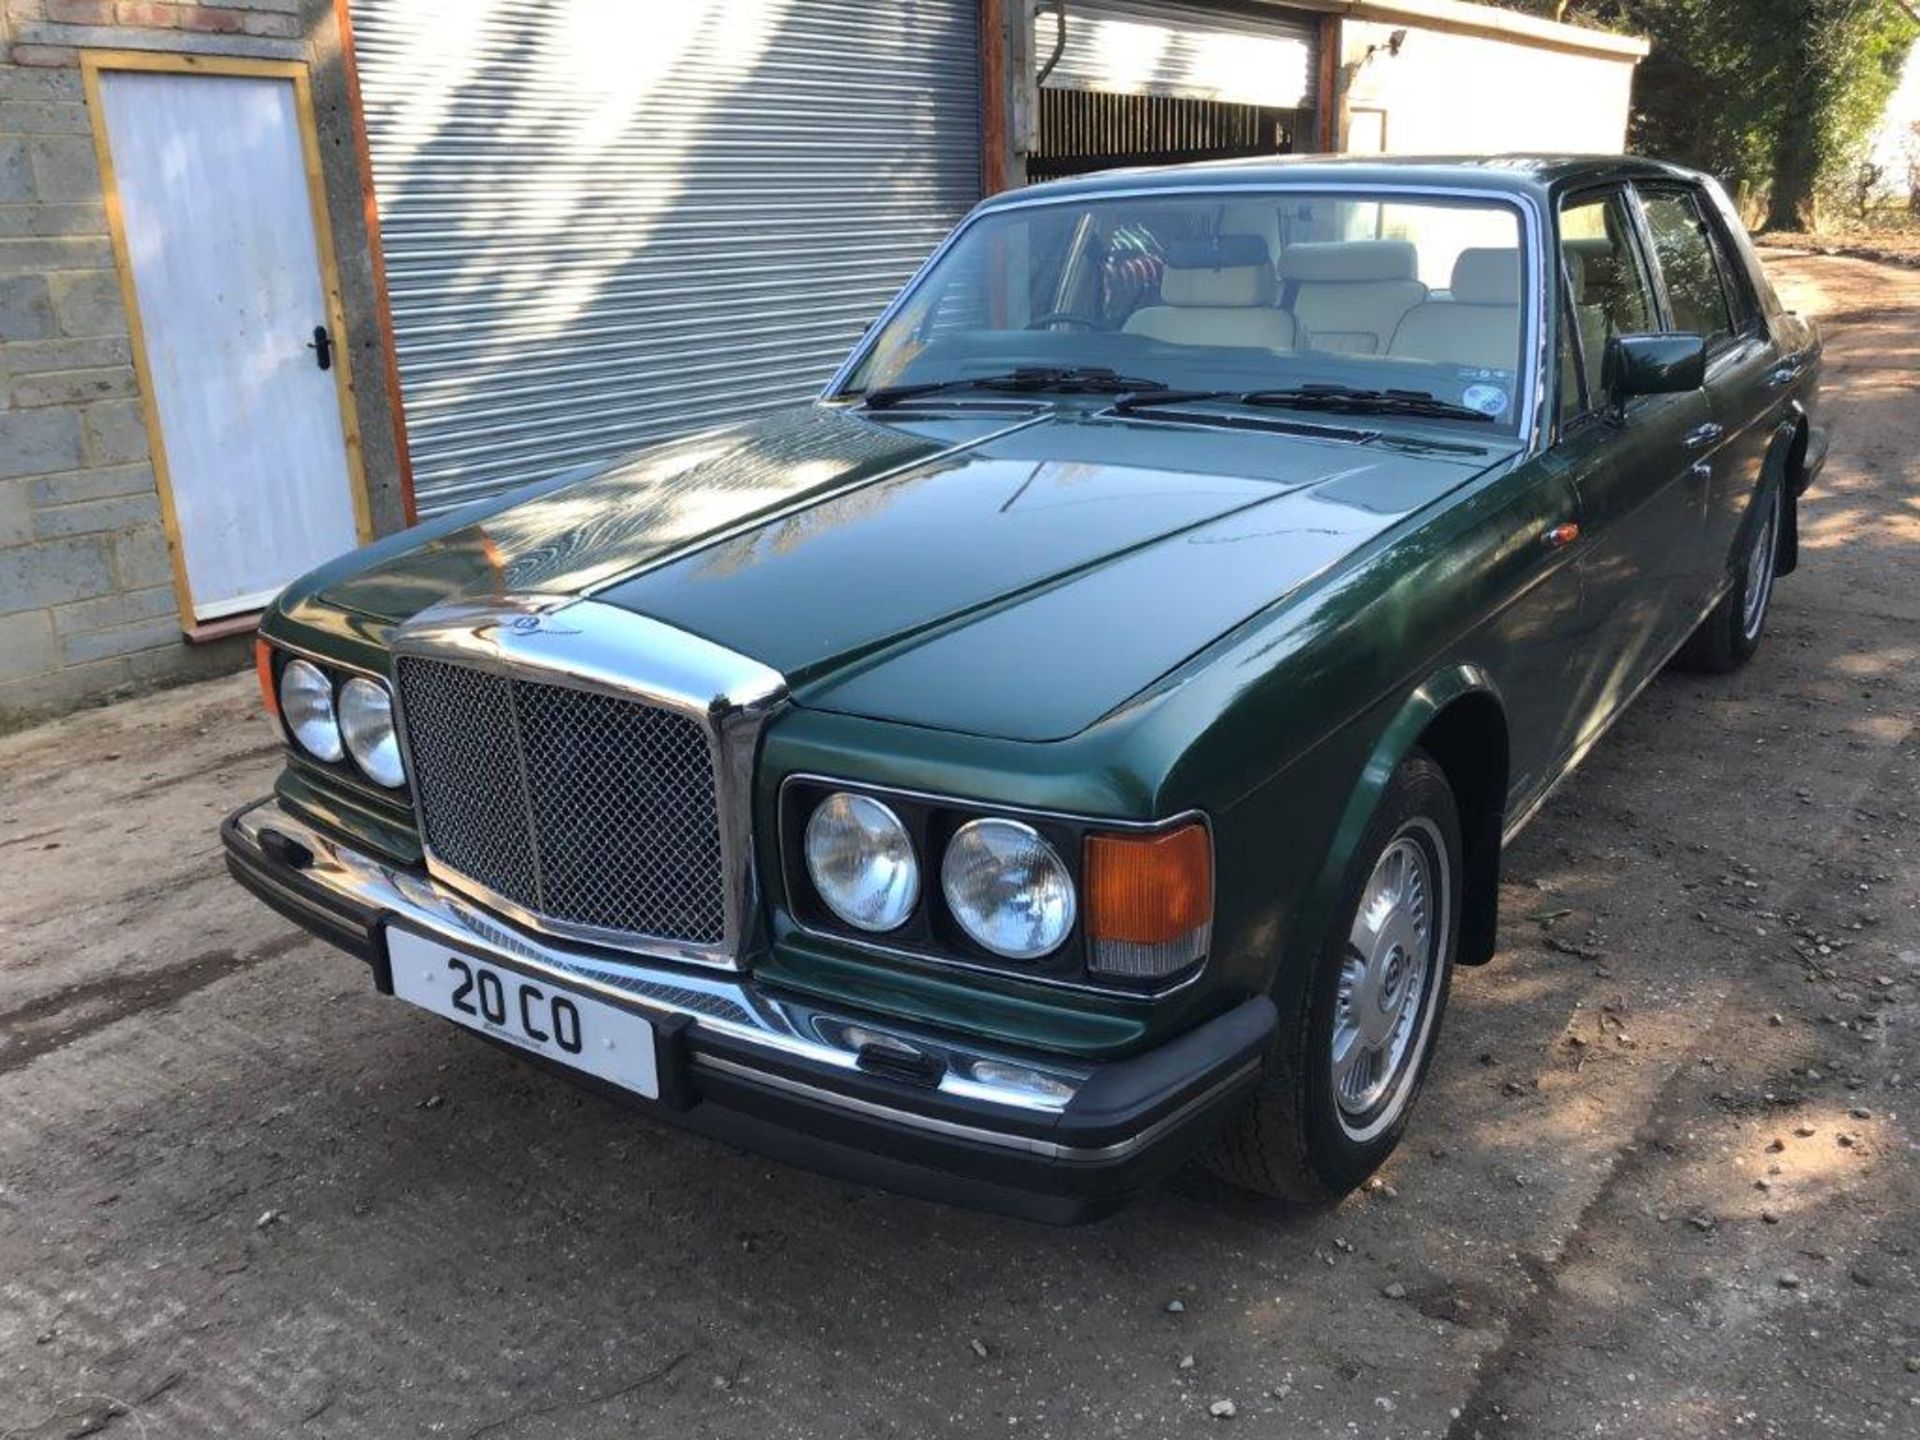 1989 BENTLEY 56k MILES - PRIVATE PLATE "20 CO" 2 PREVIOUS OWNERS FROM NEW - NEW MOT TO MARCH 2019 - Image 3 of 30